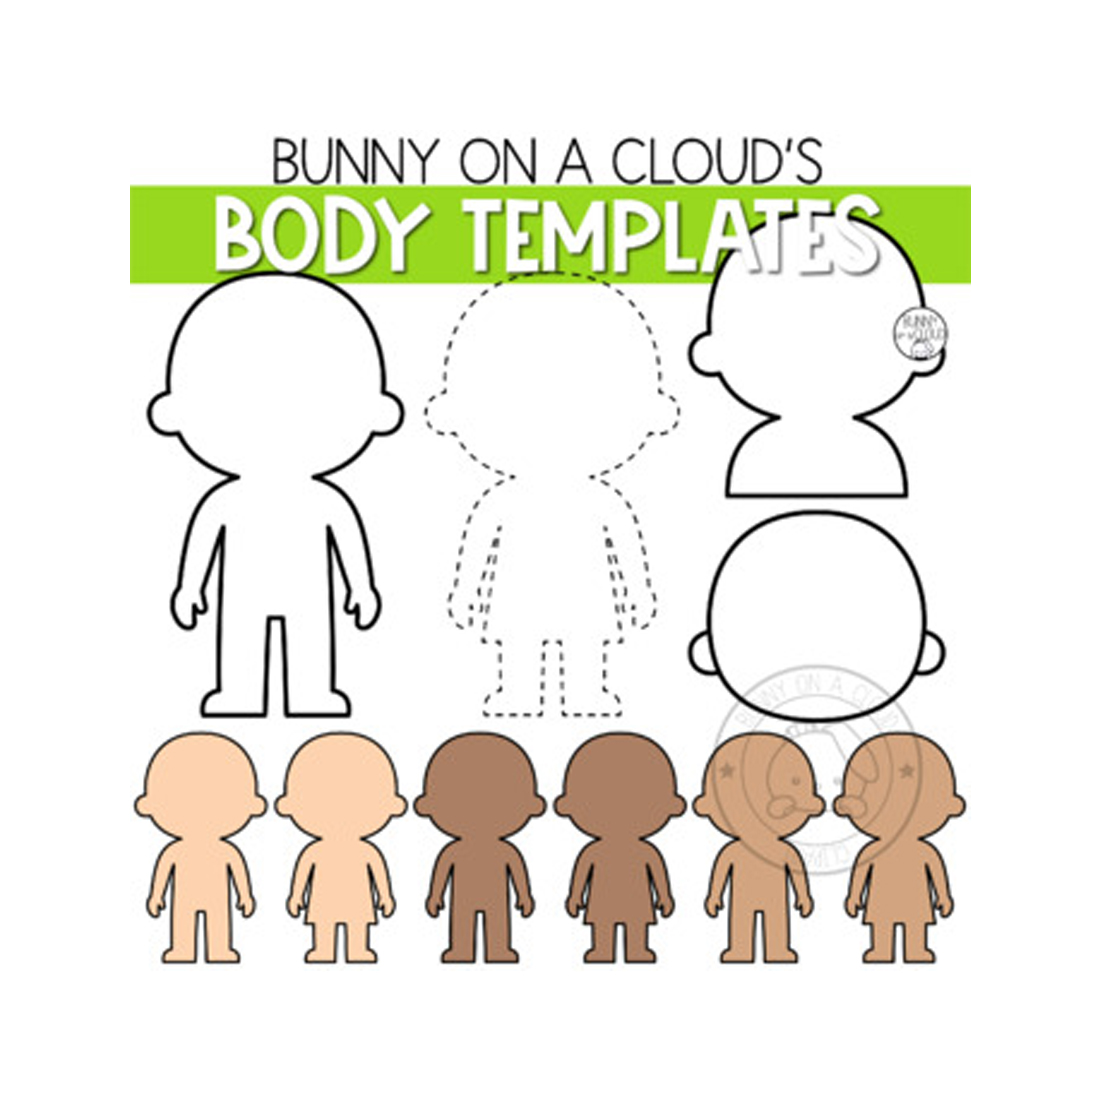 Kids Body Templates Clipart by Bunny On A Cloud cover image.